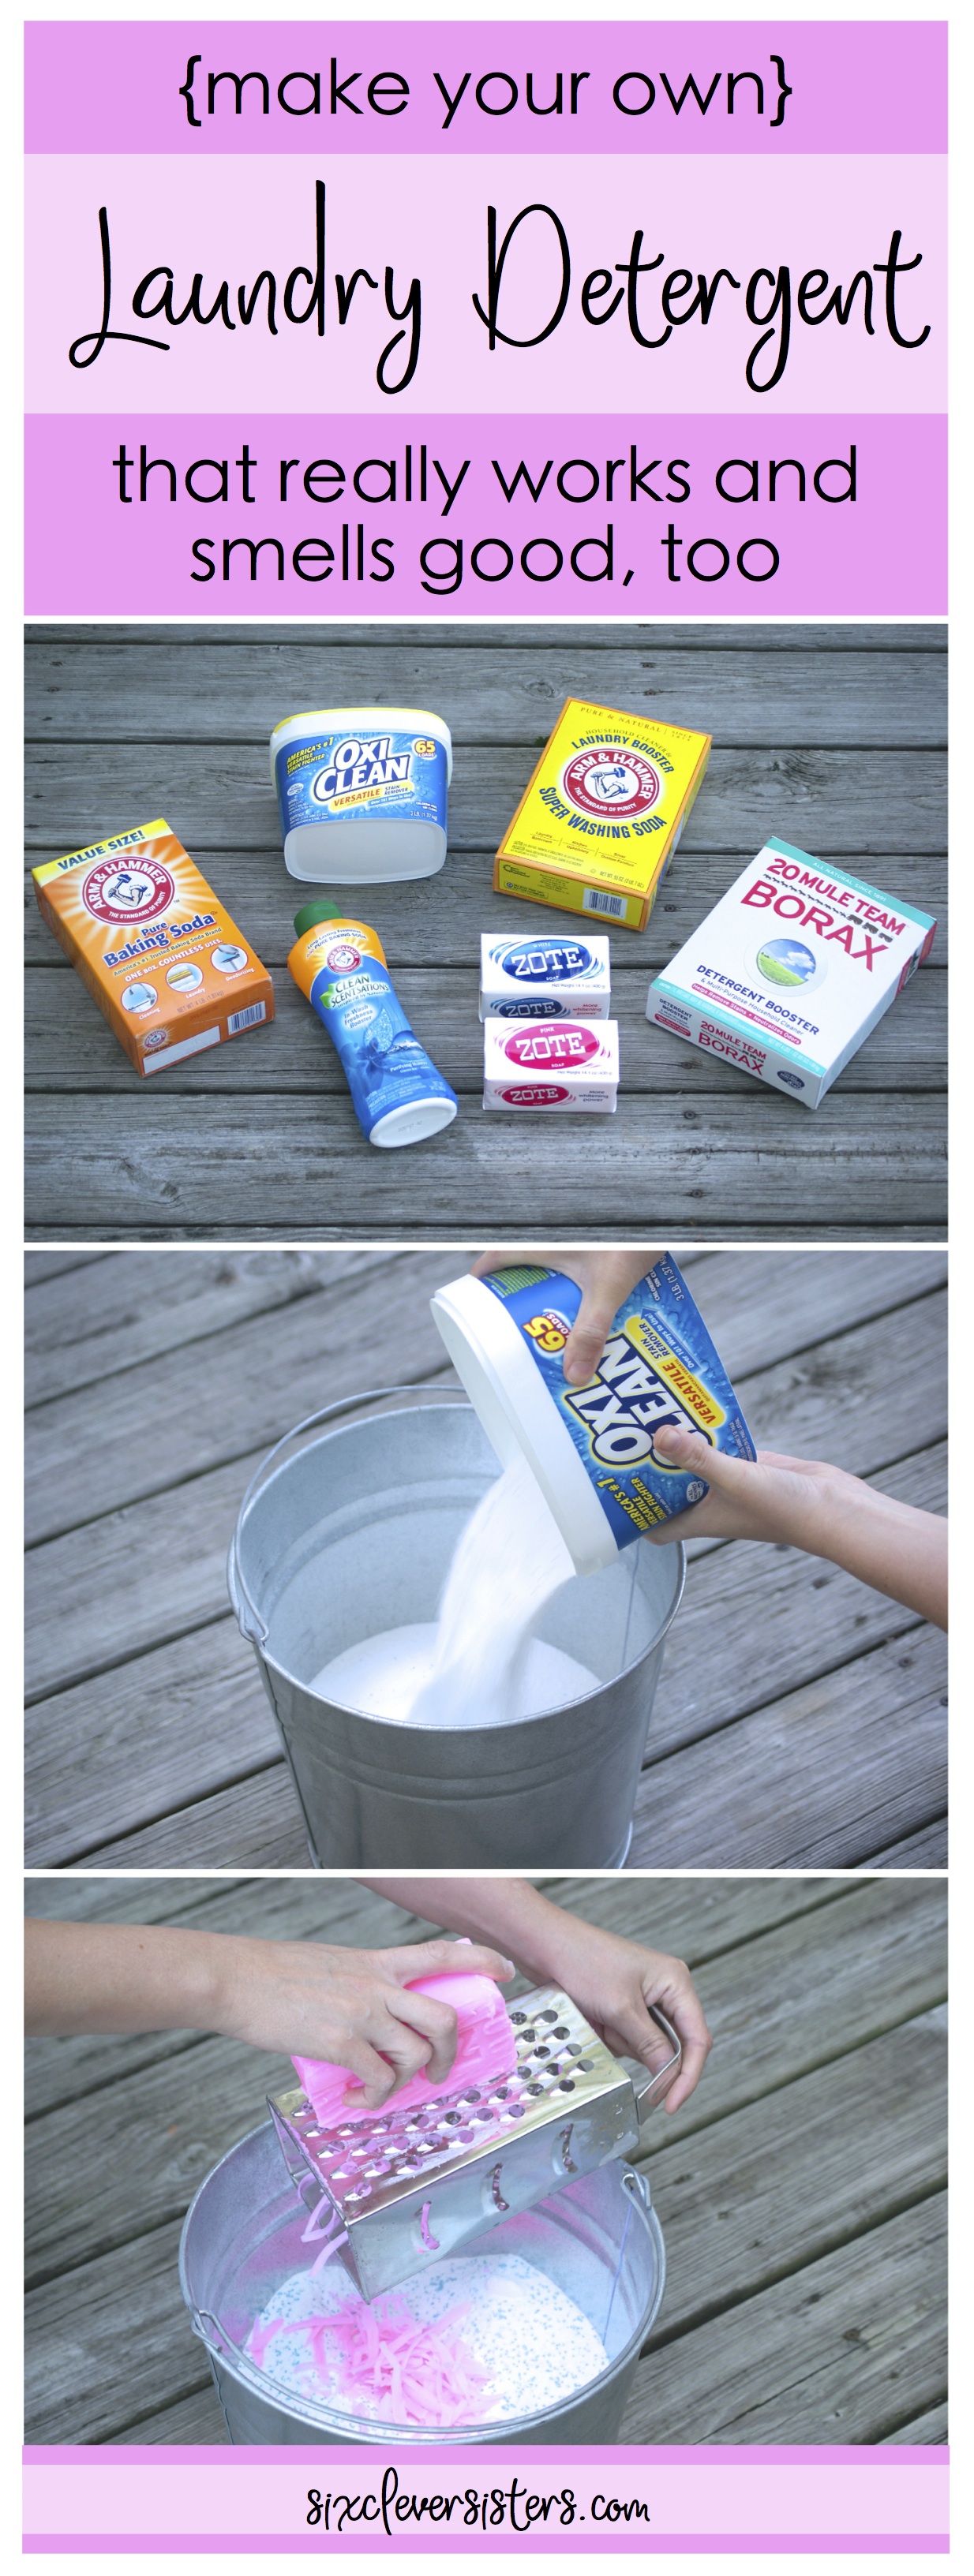 make-your-own-powdered-laundry-detergent-six-clever-sisters